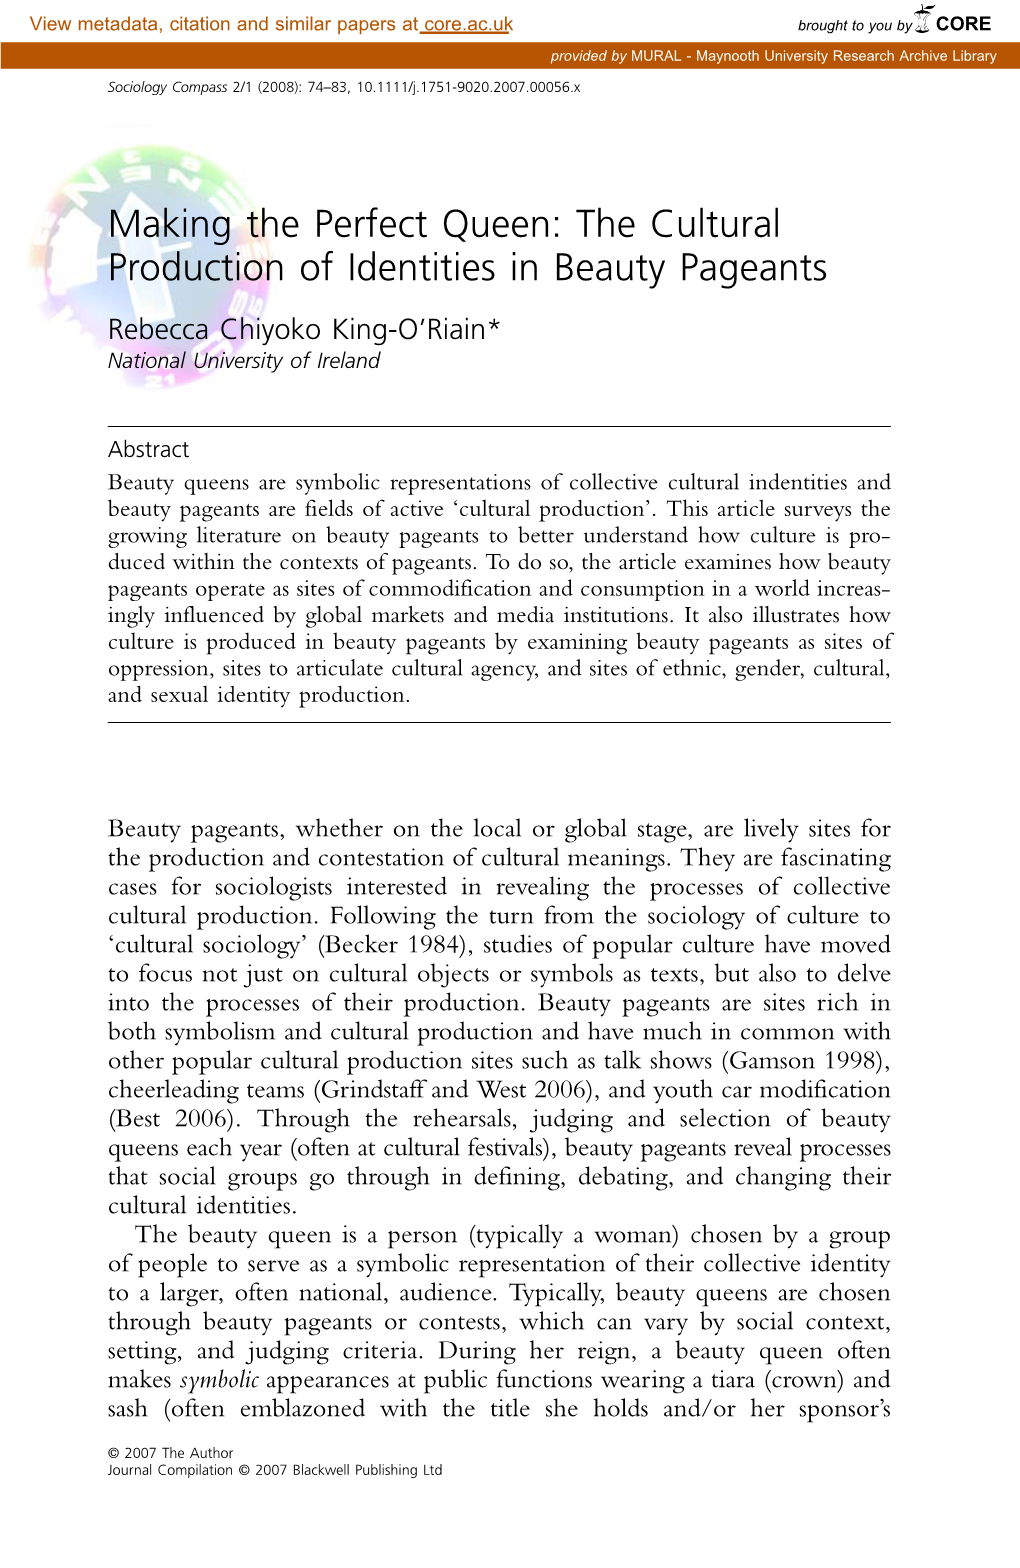 The Cultural Production of Identities in Beauty Pageants Rebecca Chiyoko King-O’Riain* National University of Ireland